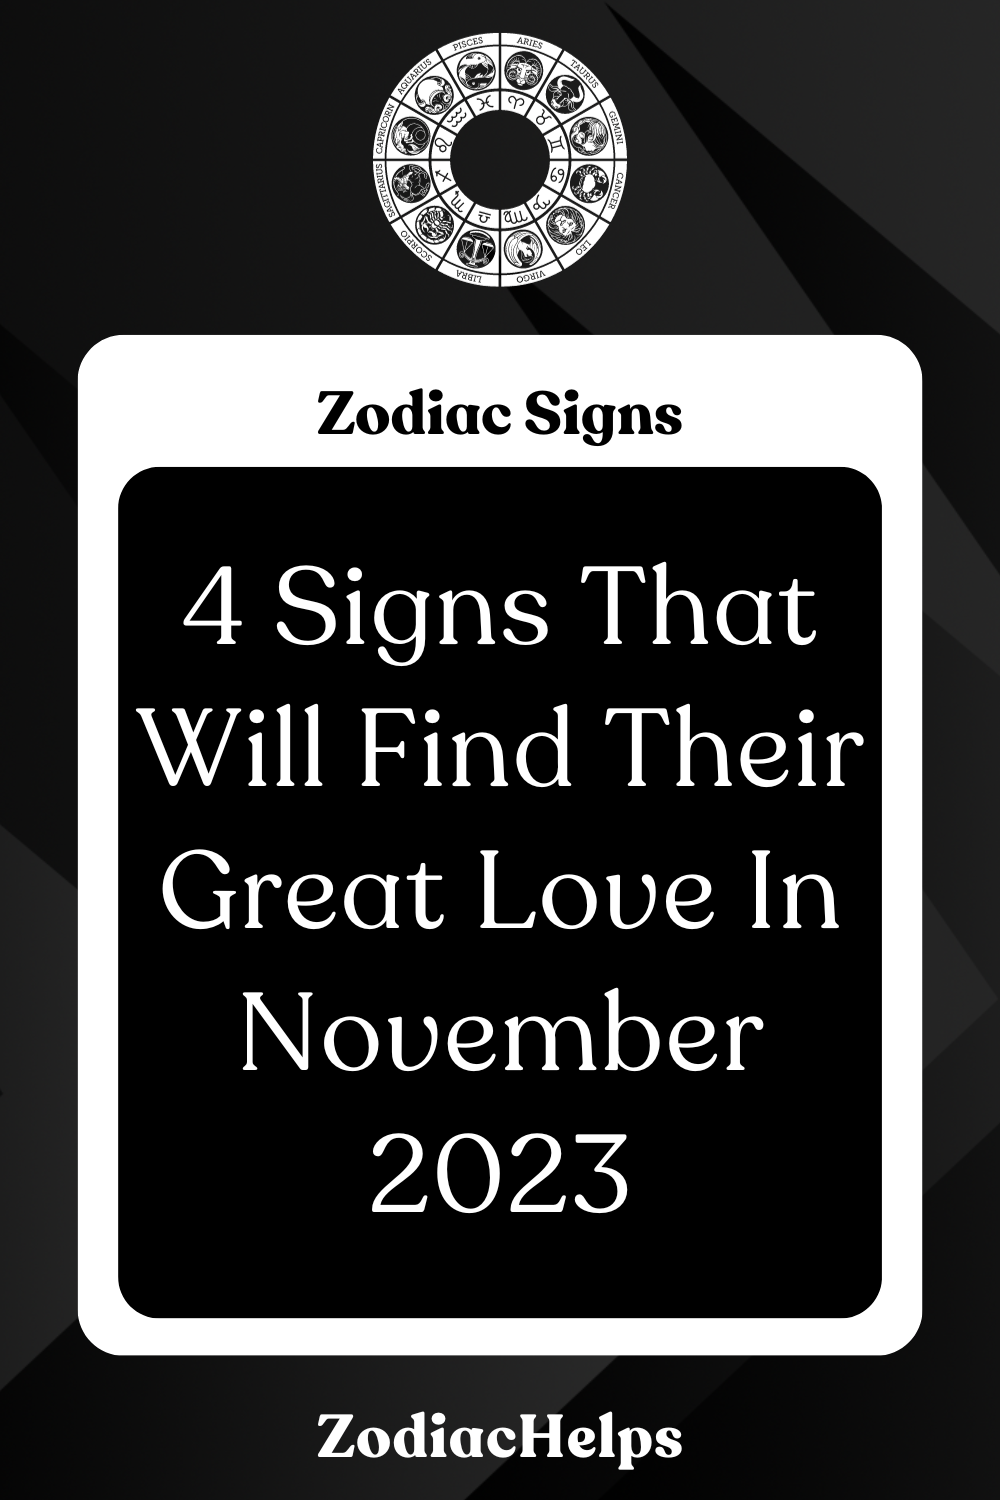 4 Signs That Will Find Their Great Love In November 2023